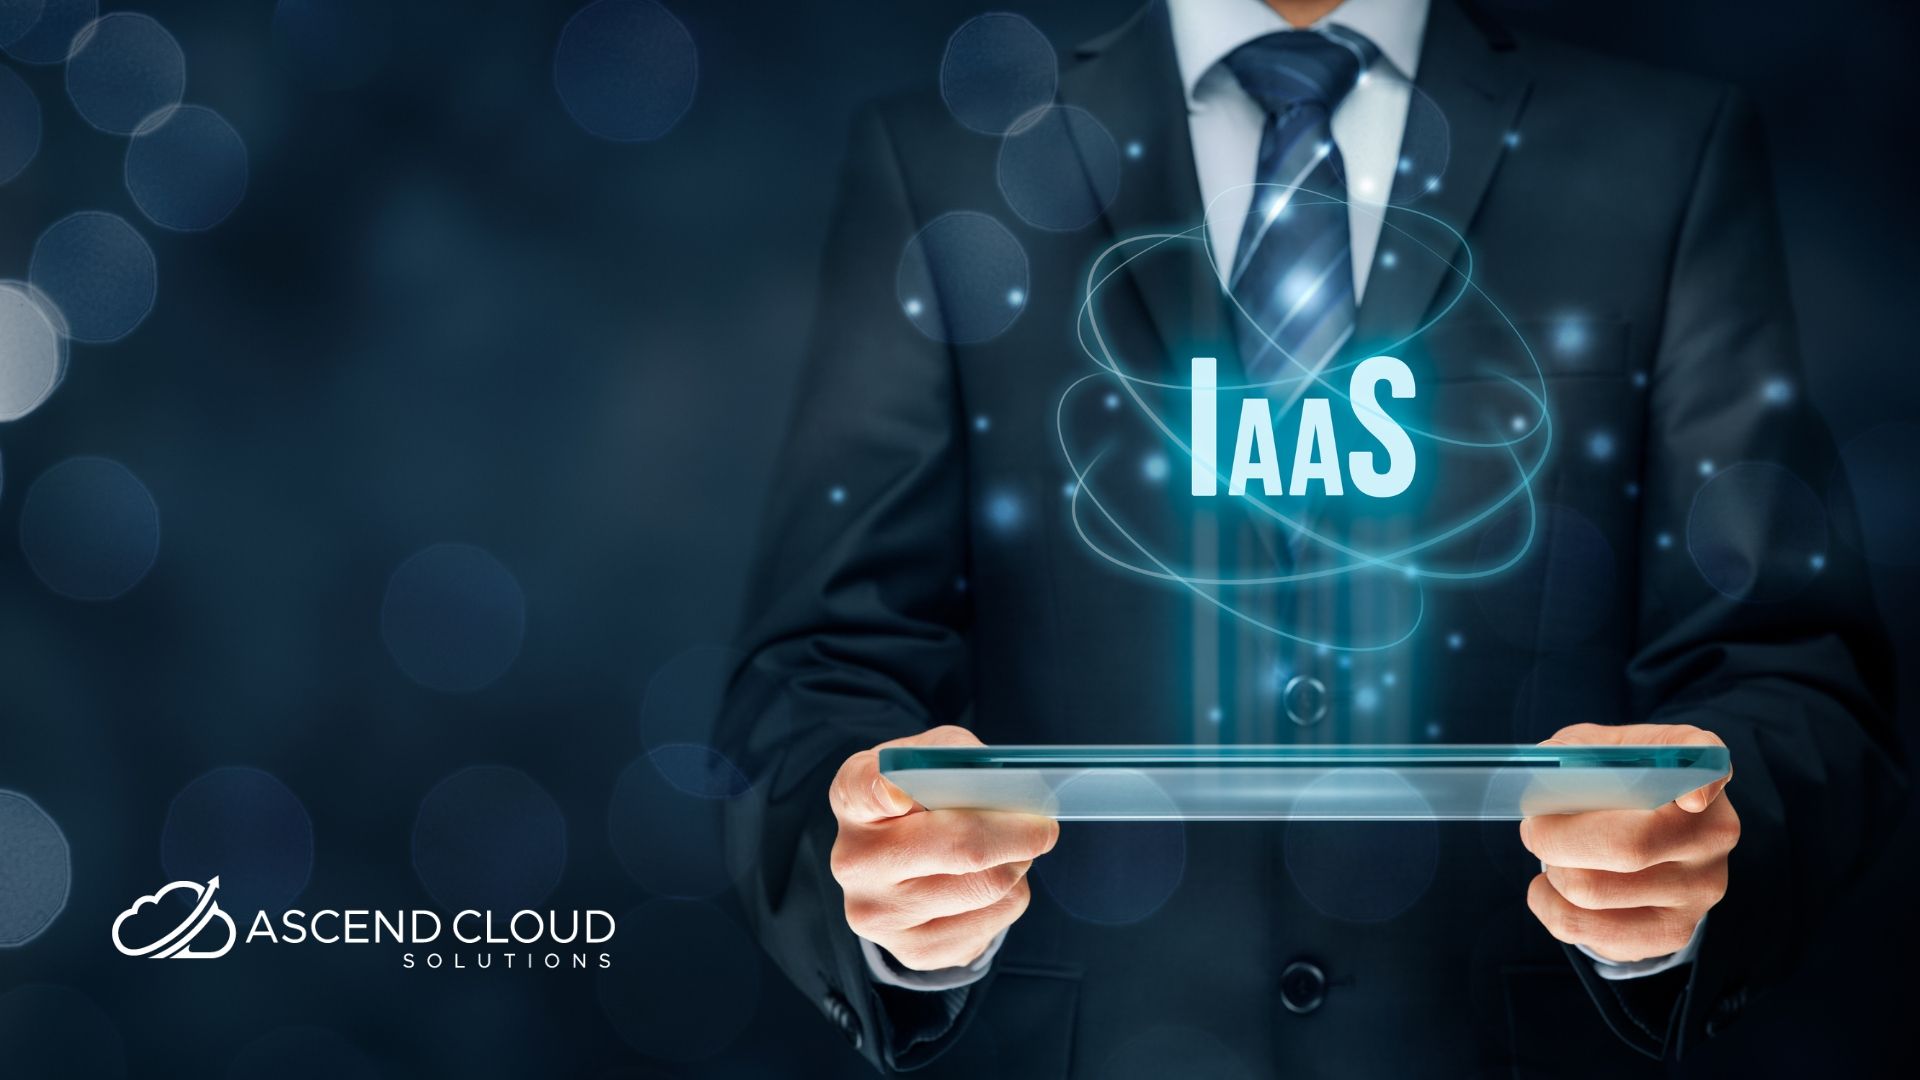 Should IaaS (infrastructure as a service) be the preserve of large enterprises? Or should SMEs consider investing in it too? Find out our thoughts inside.